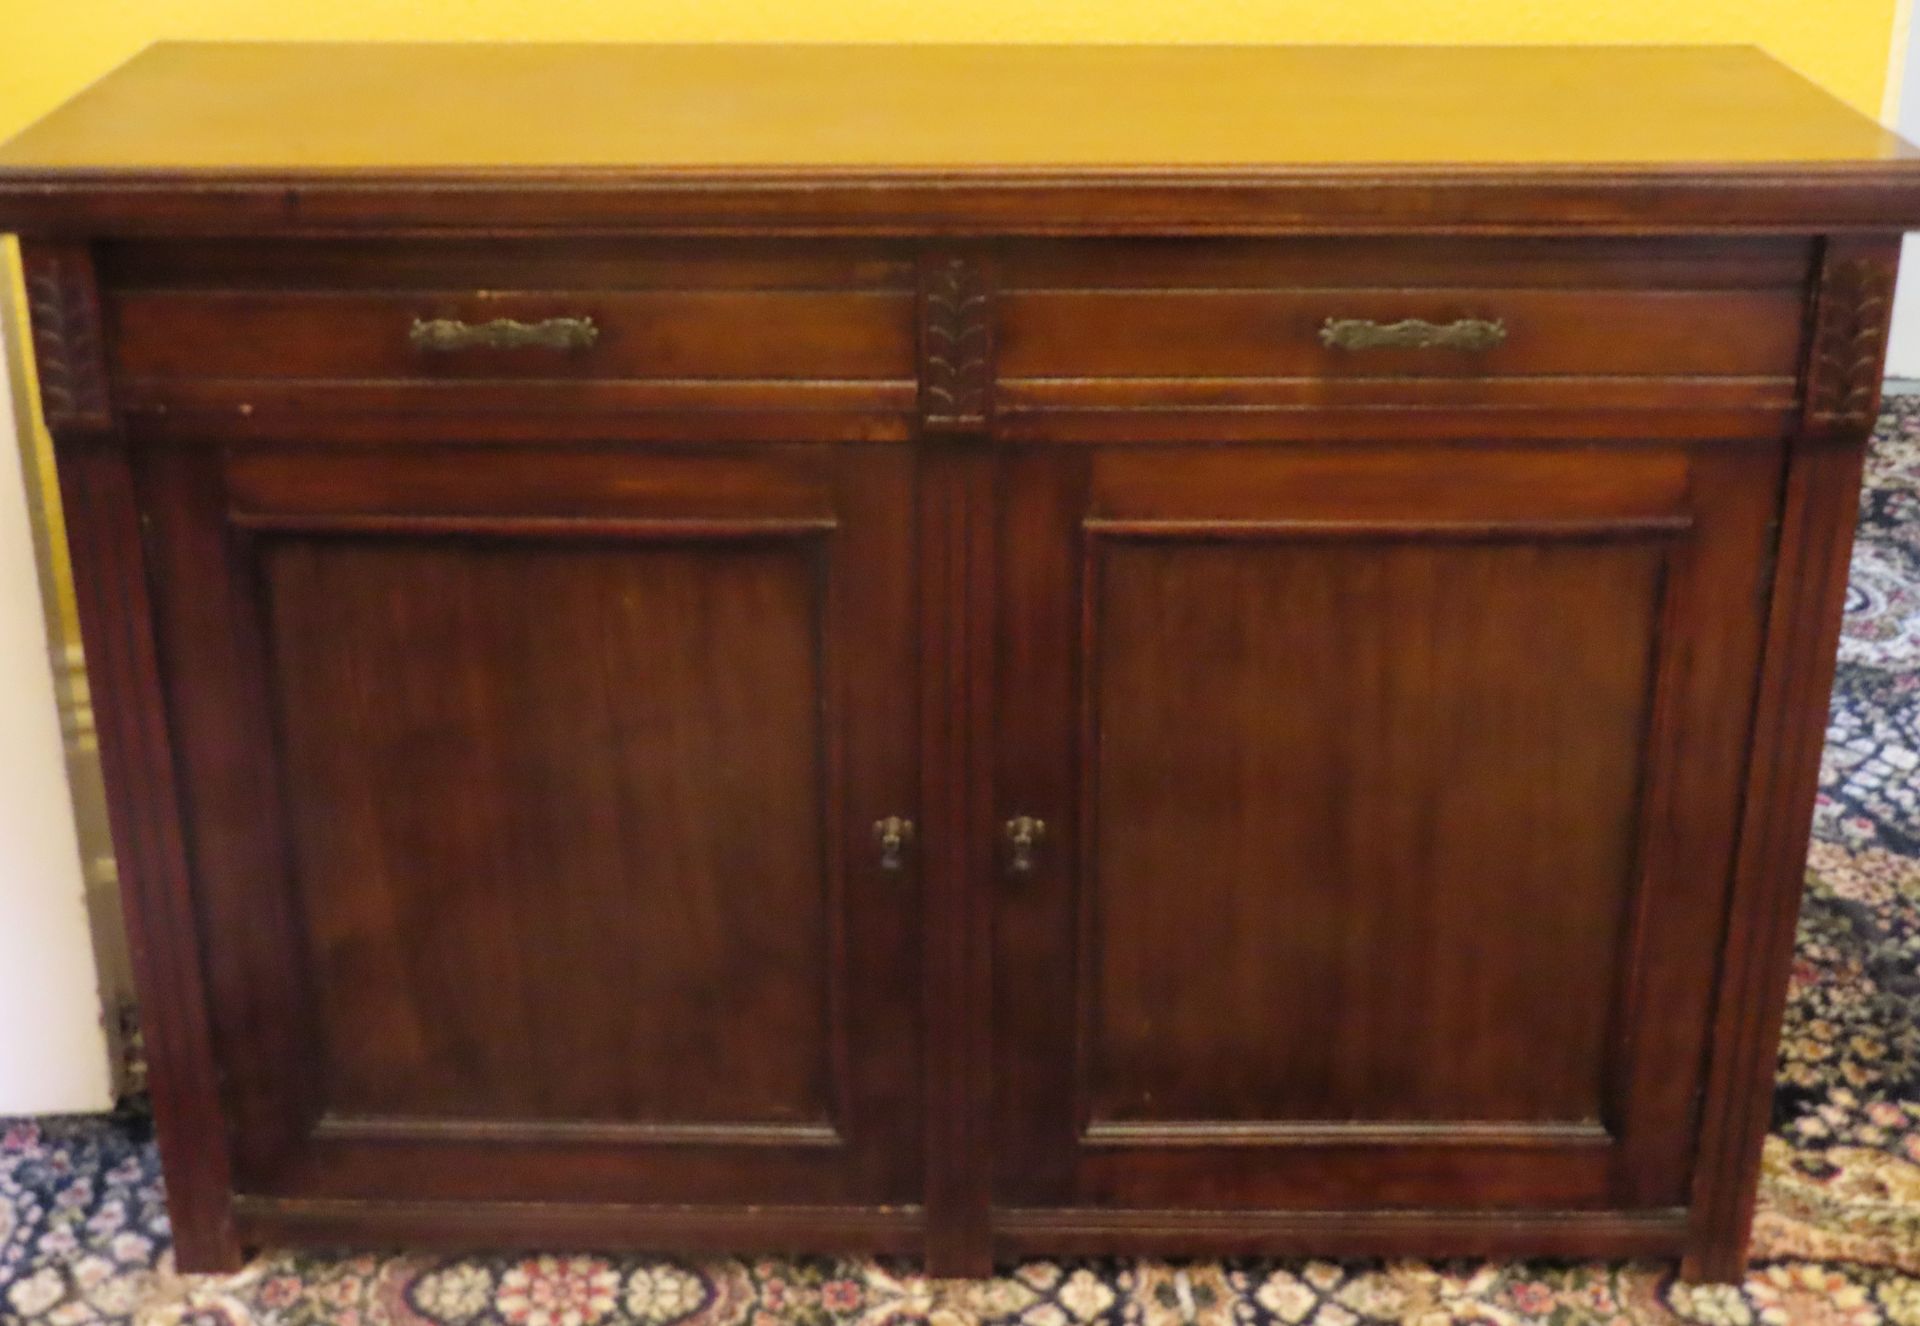 Late 19th/Early 20th century two drawer sideboard. Approx. 85cm H x 123cm W x 42cm D